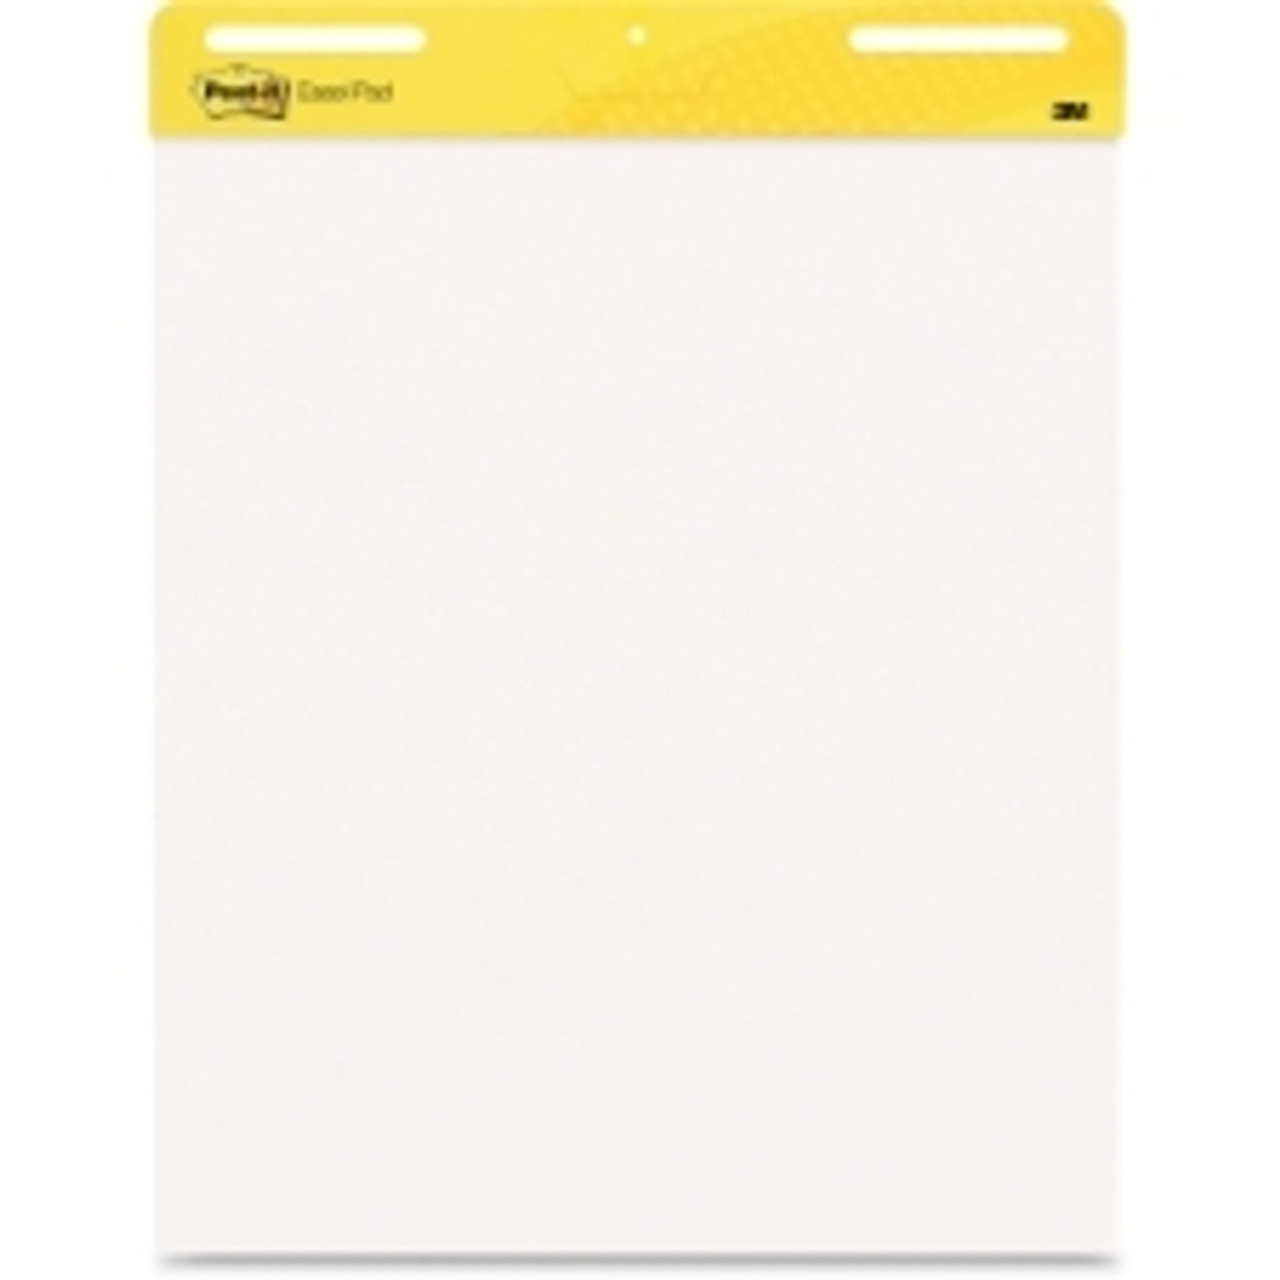 Buy Post-it 25 x 30 Recycled White Self-Stick Easel Pad